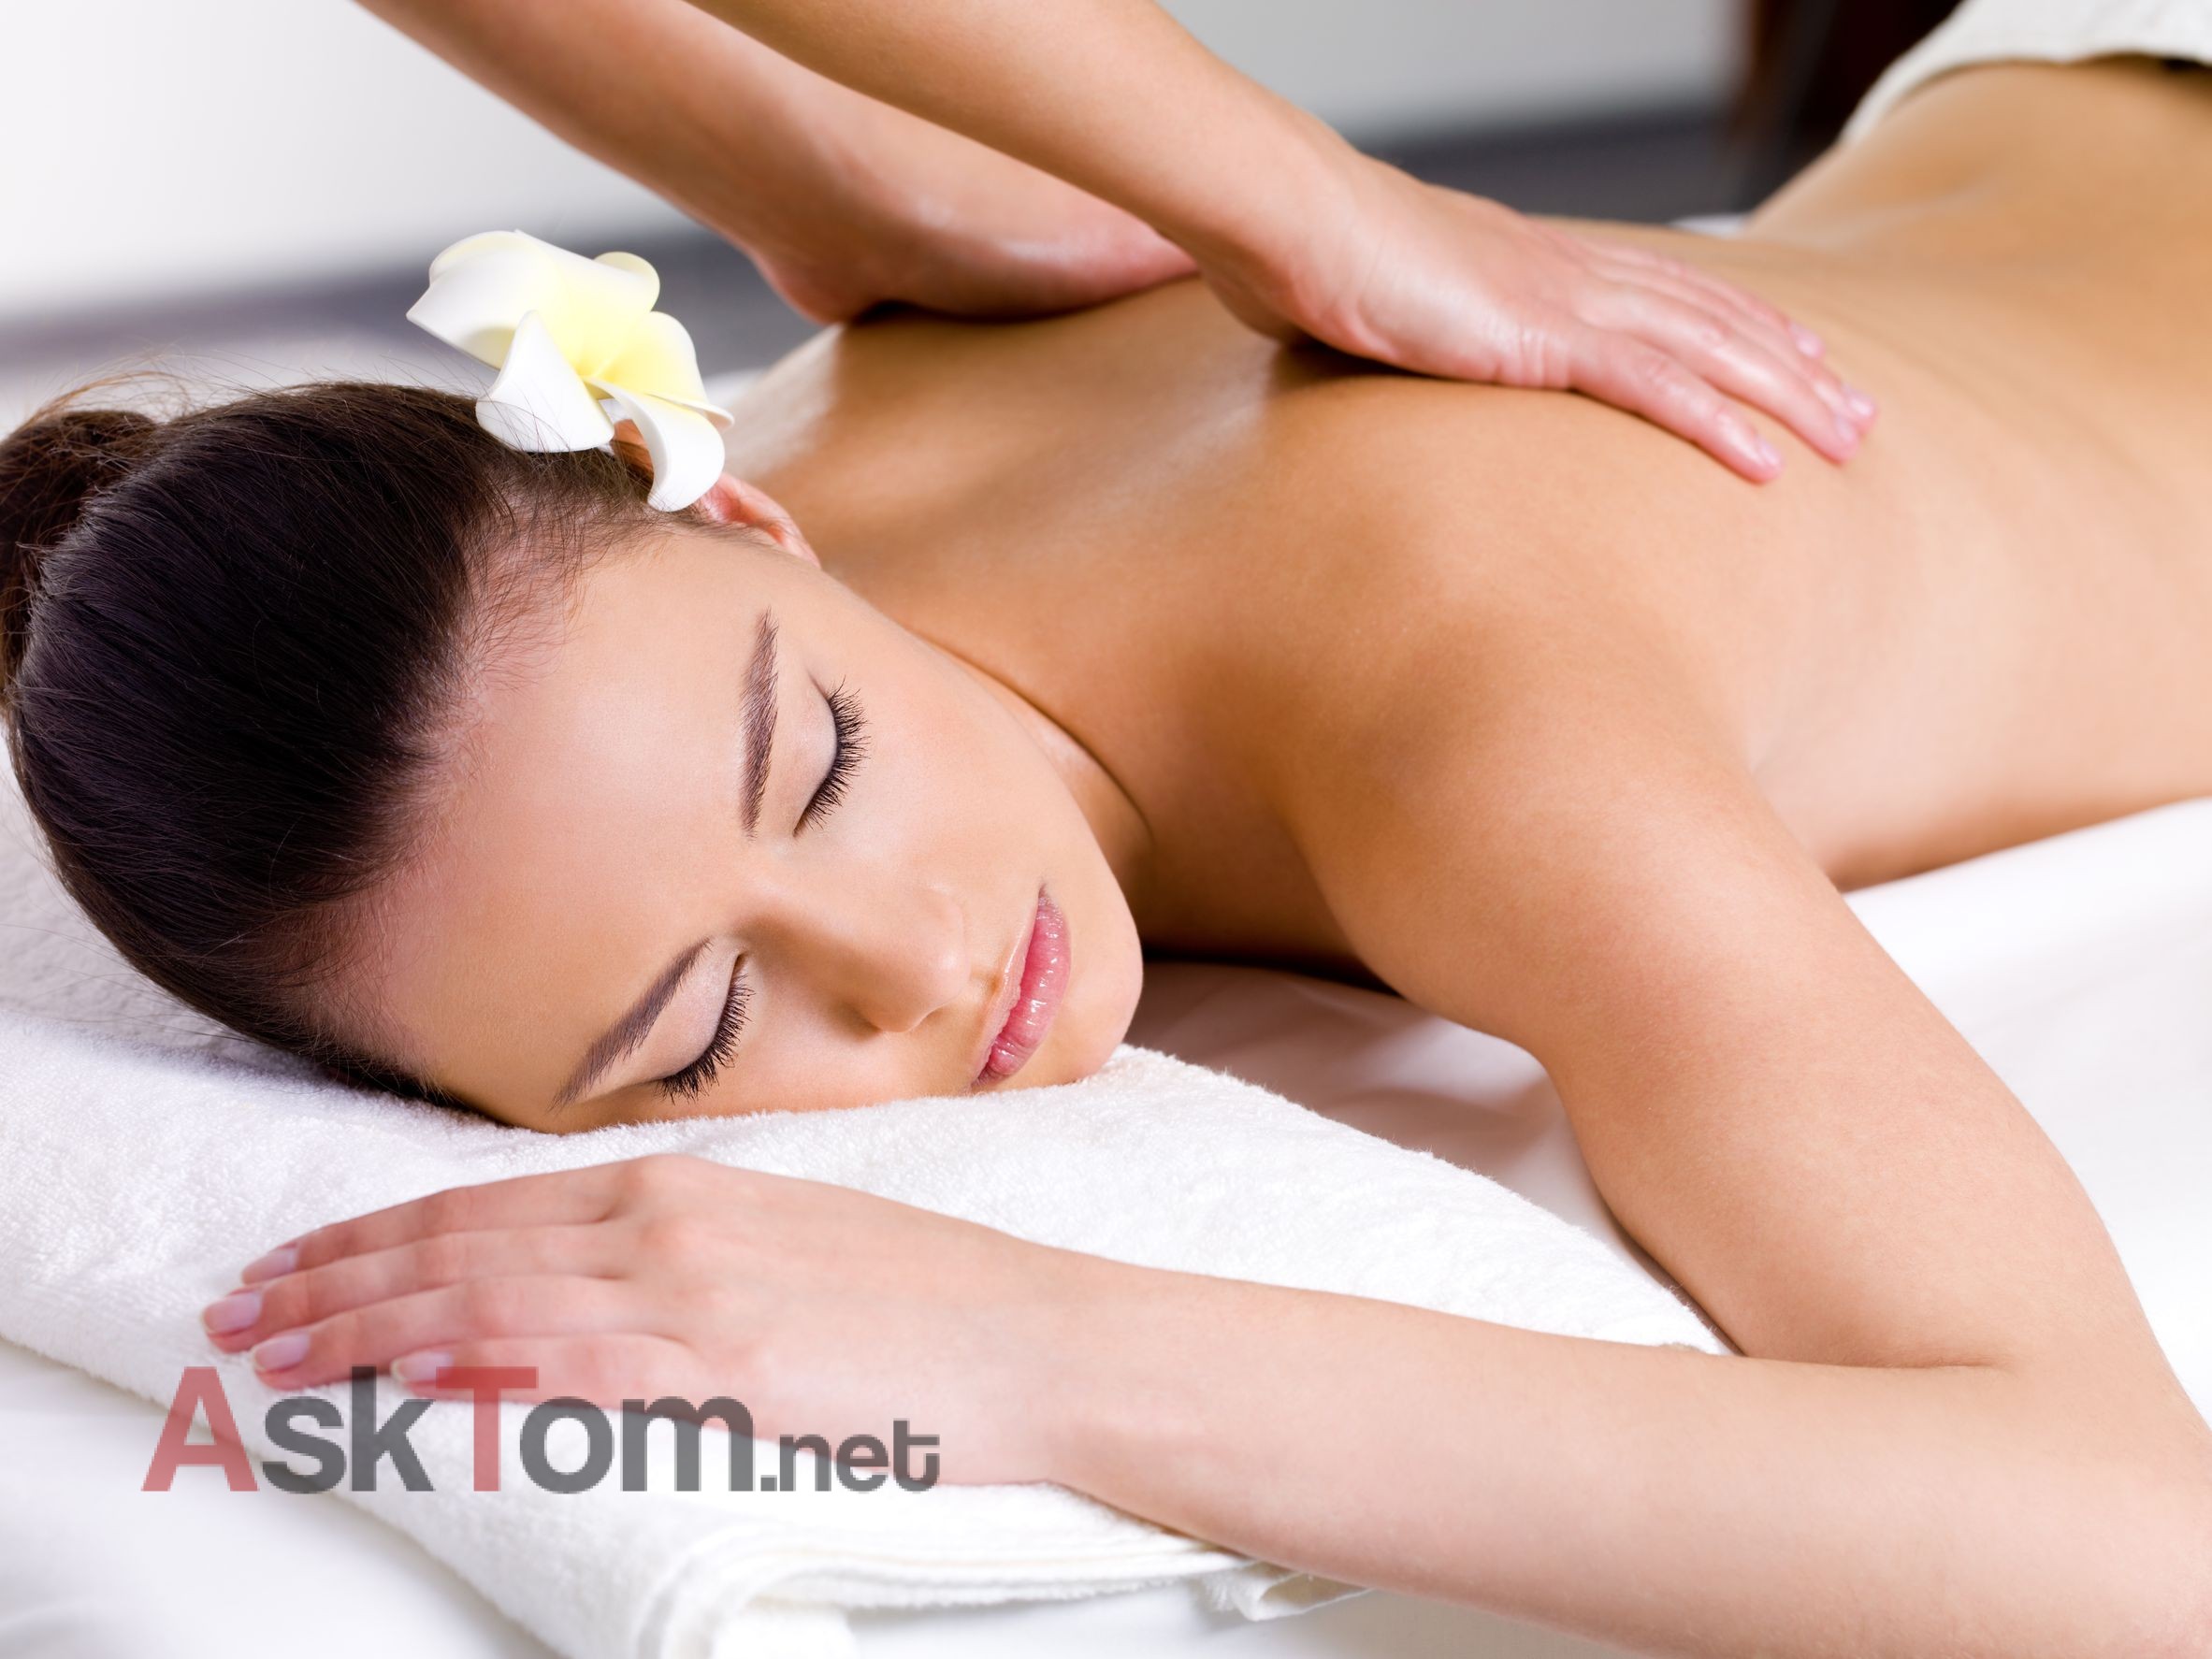 Massages for $65.00 for 1 hour at licensed home spa